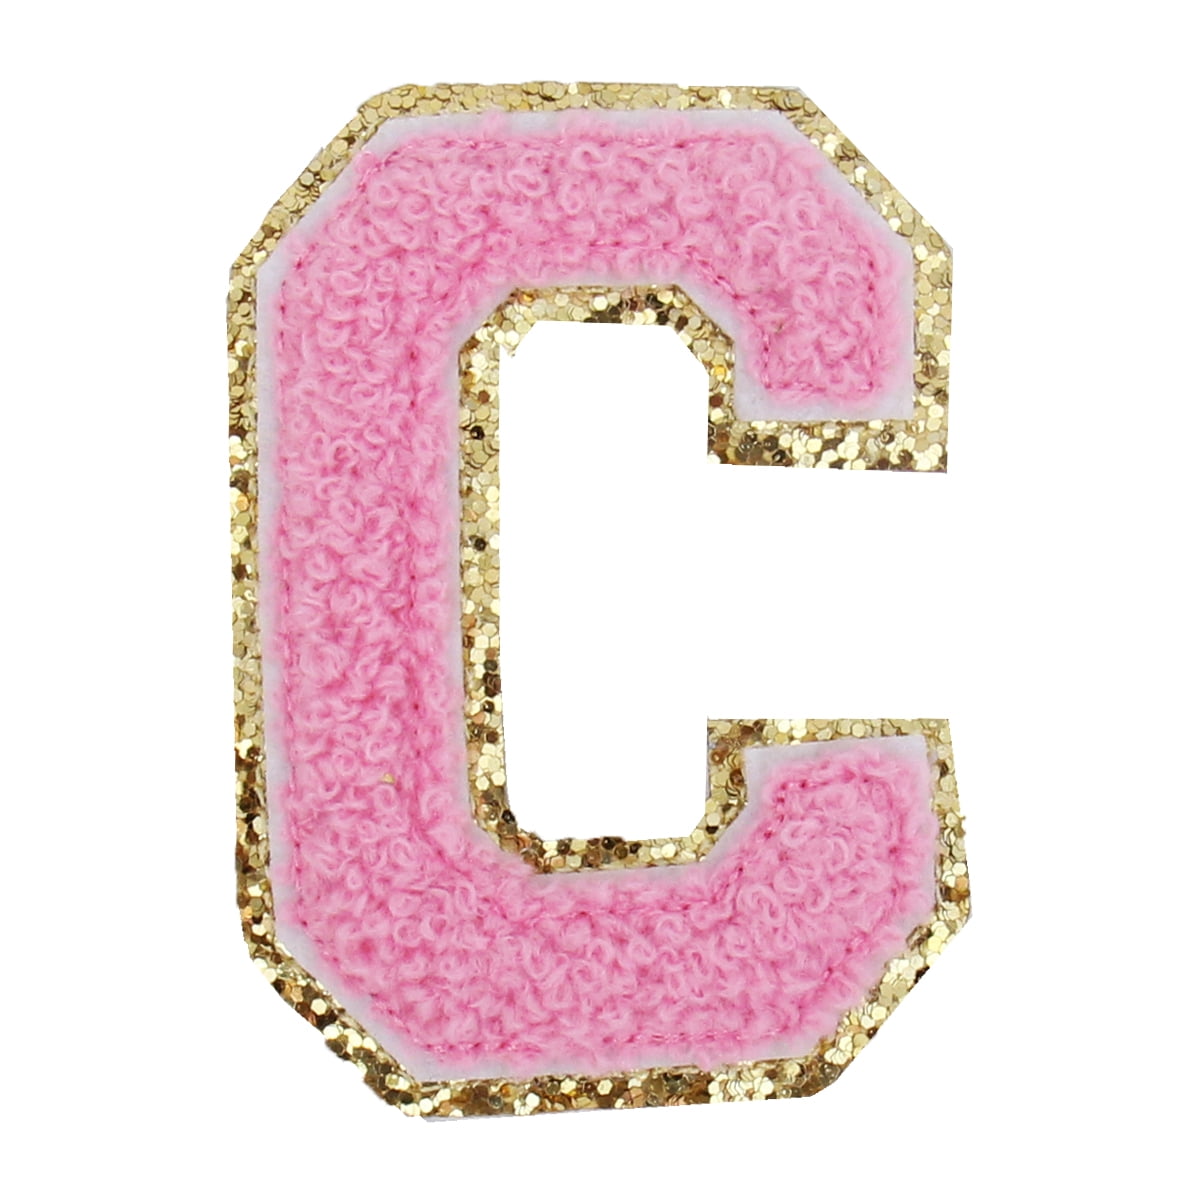 2 Pcs 2.4 Inches Chenille Letter Patches, Iron on Letters for Fabric Clothing/Hat/Bag, A-Z Varsity Letters Iron on Patches - Pink, Letter S